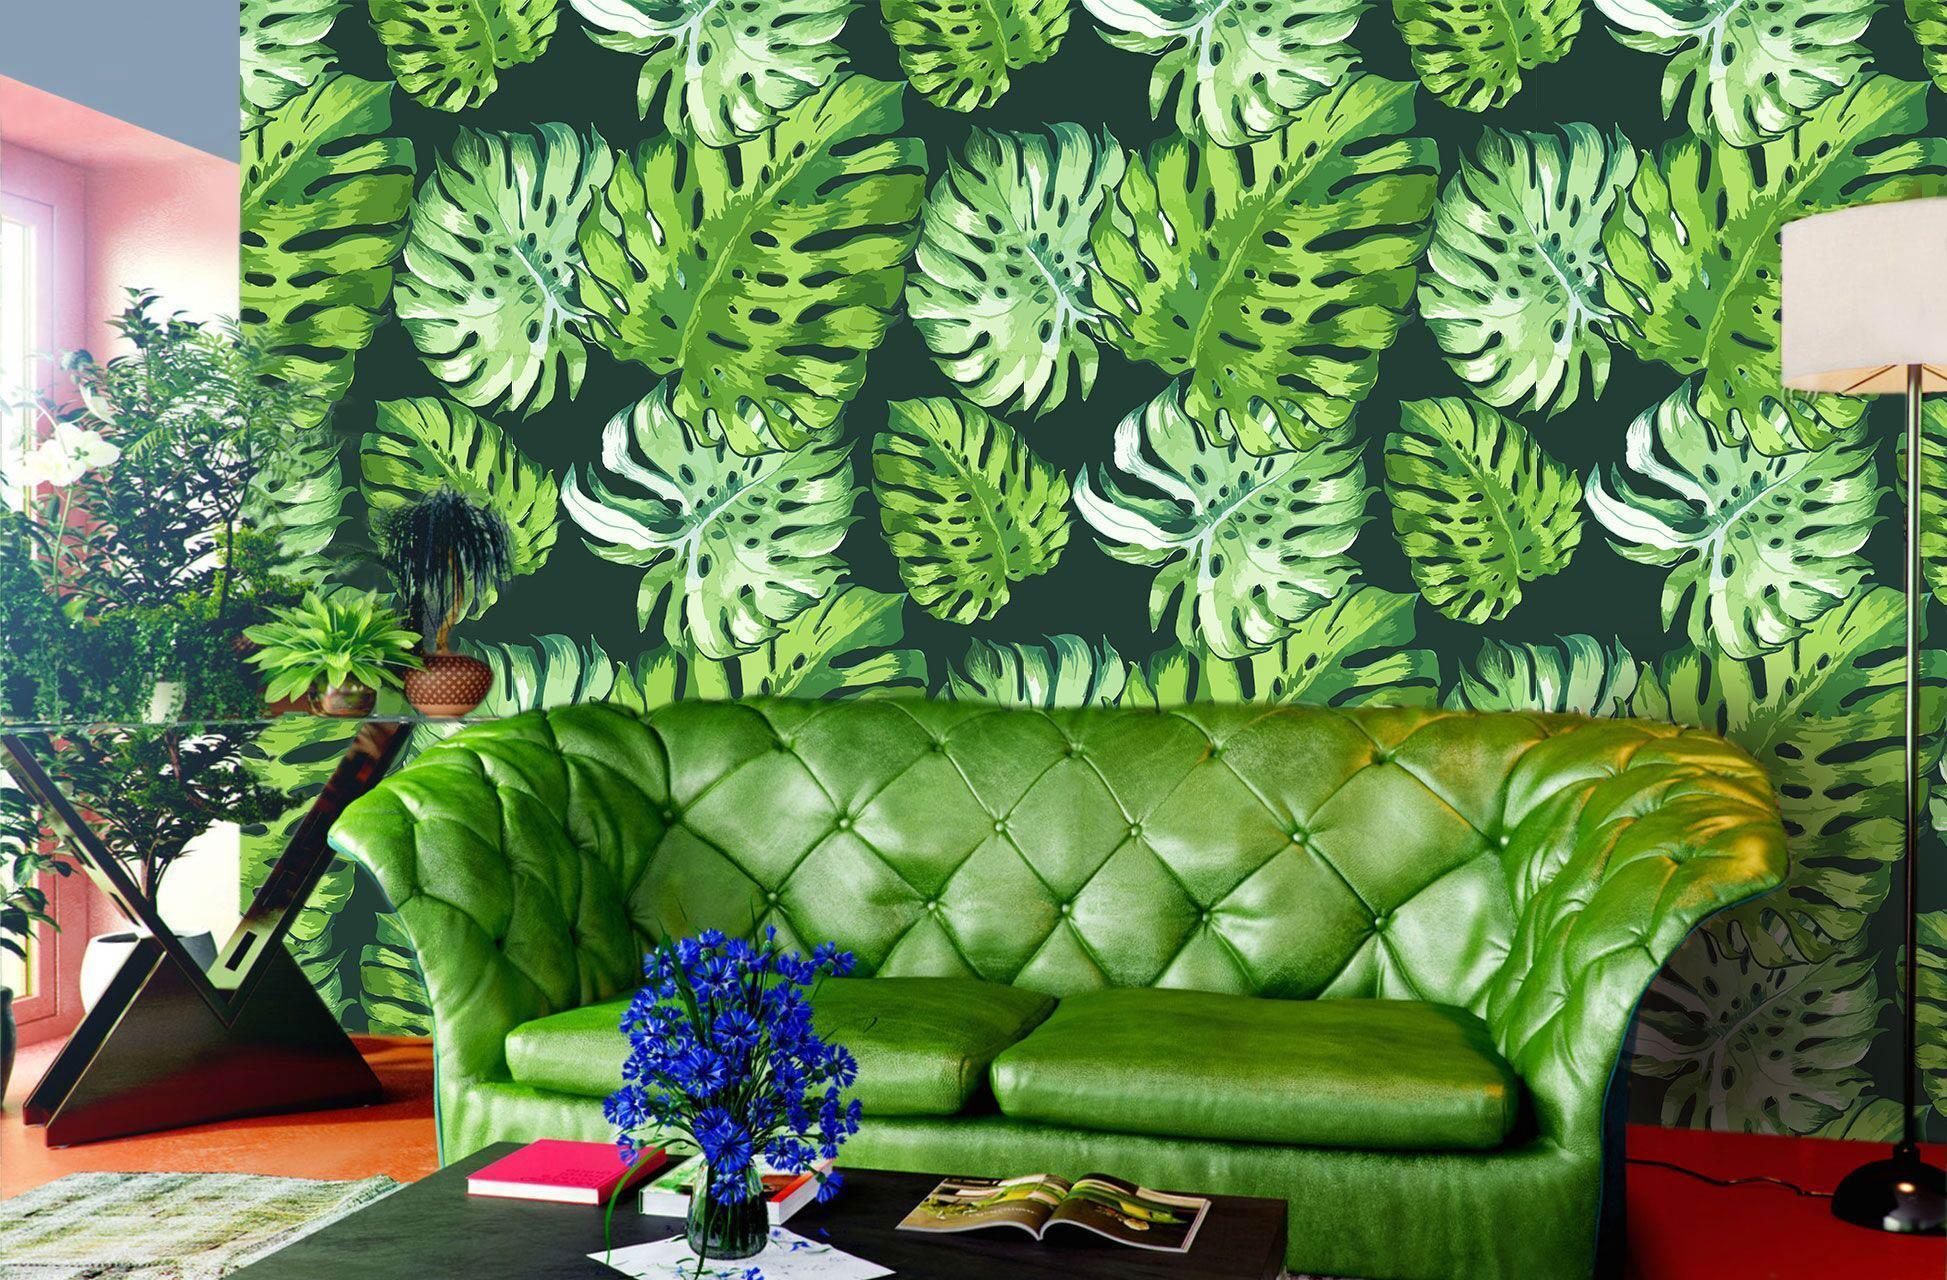 Invite the Summer into Your Home with Tropical Wallpaper